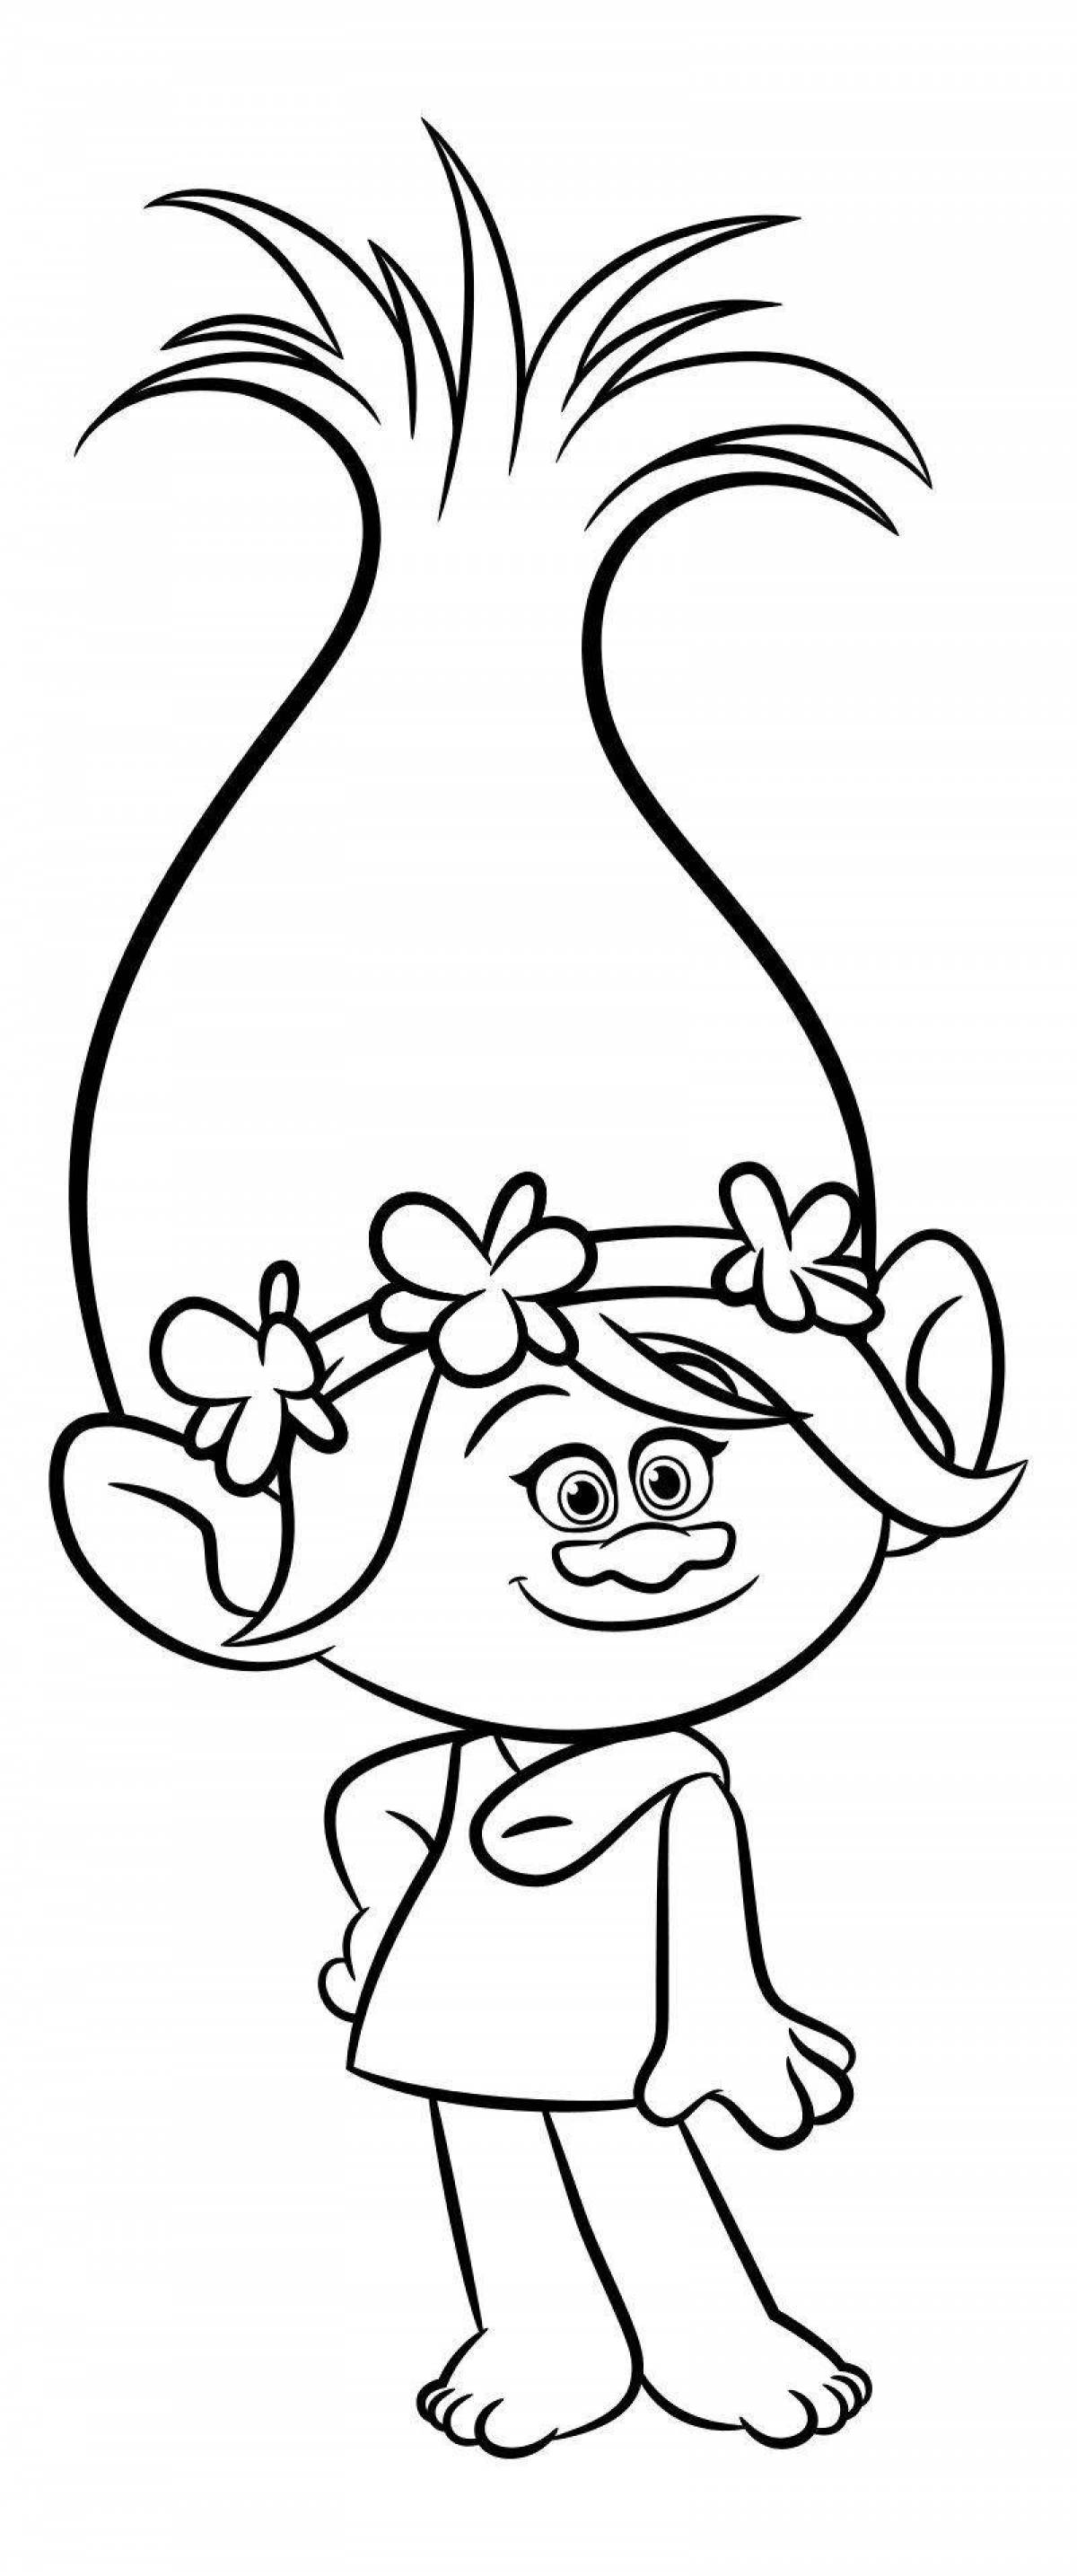 Playful cartoon troll coloring page